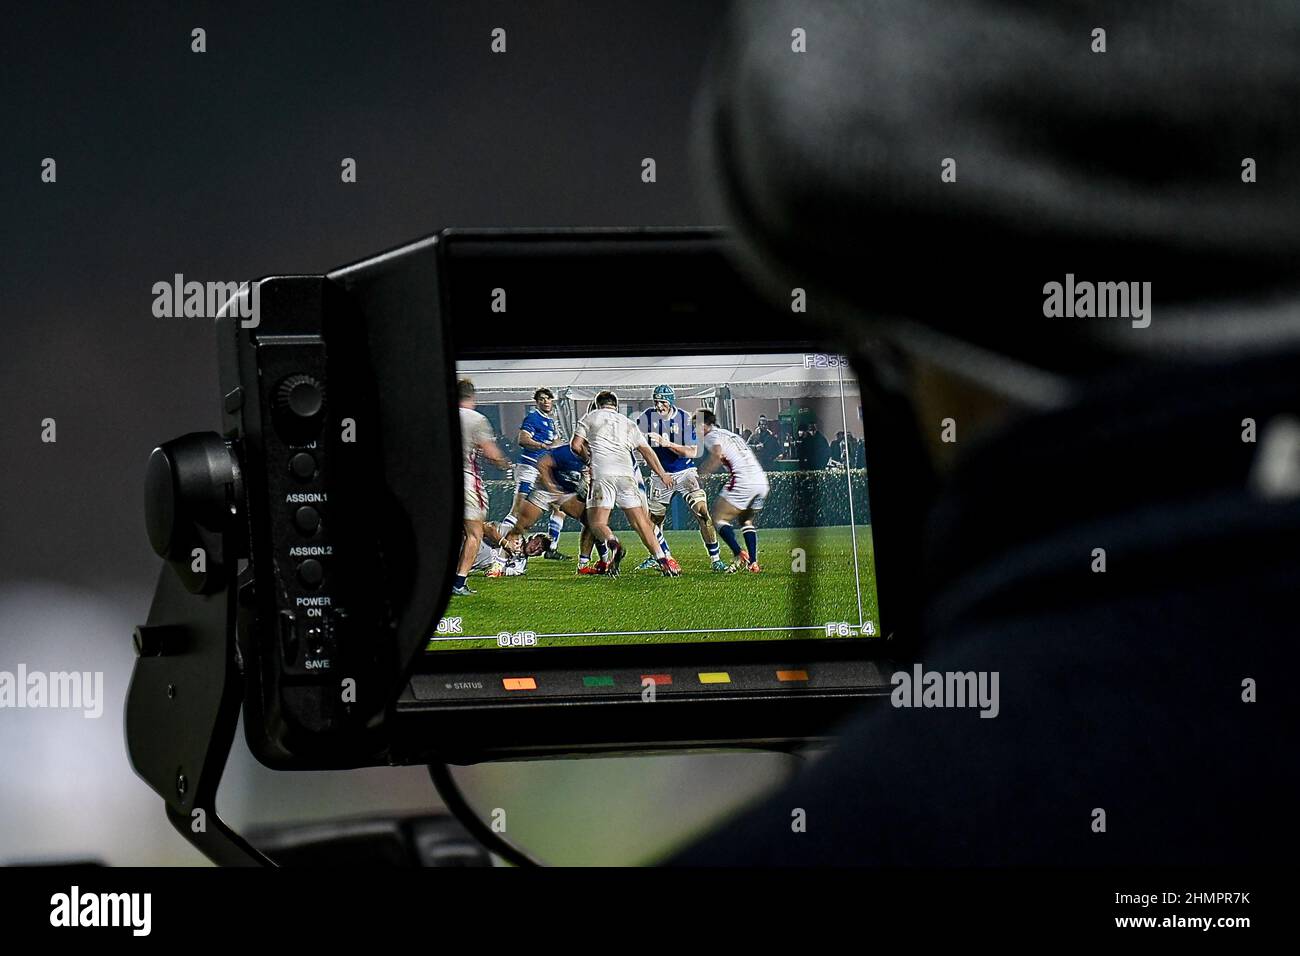 Monigo stadium, Treviso, Italy, February 11, 2022, Screen of Television Camera streaming the match during 2022 Six Nations Under 20 - Italy vs England - Rugby Six Nations match Stock Photo